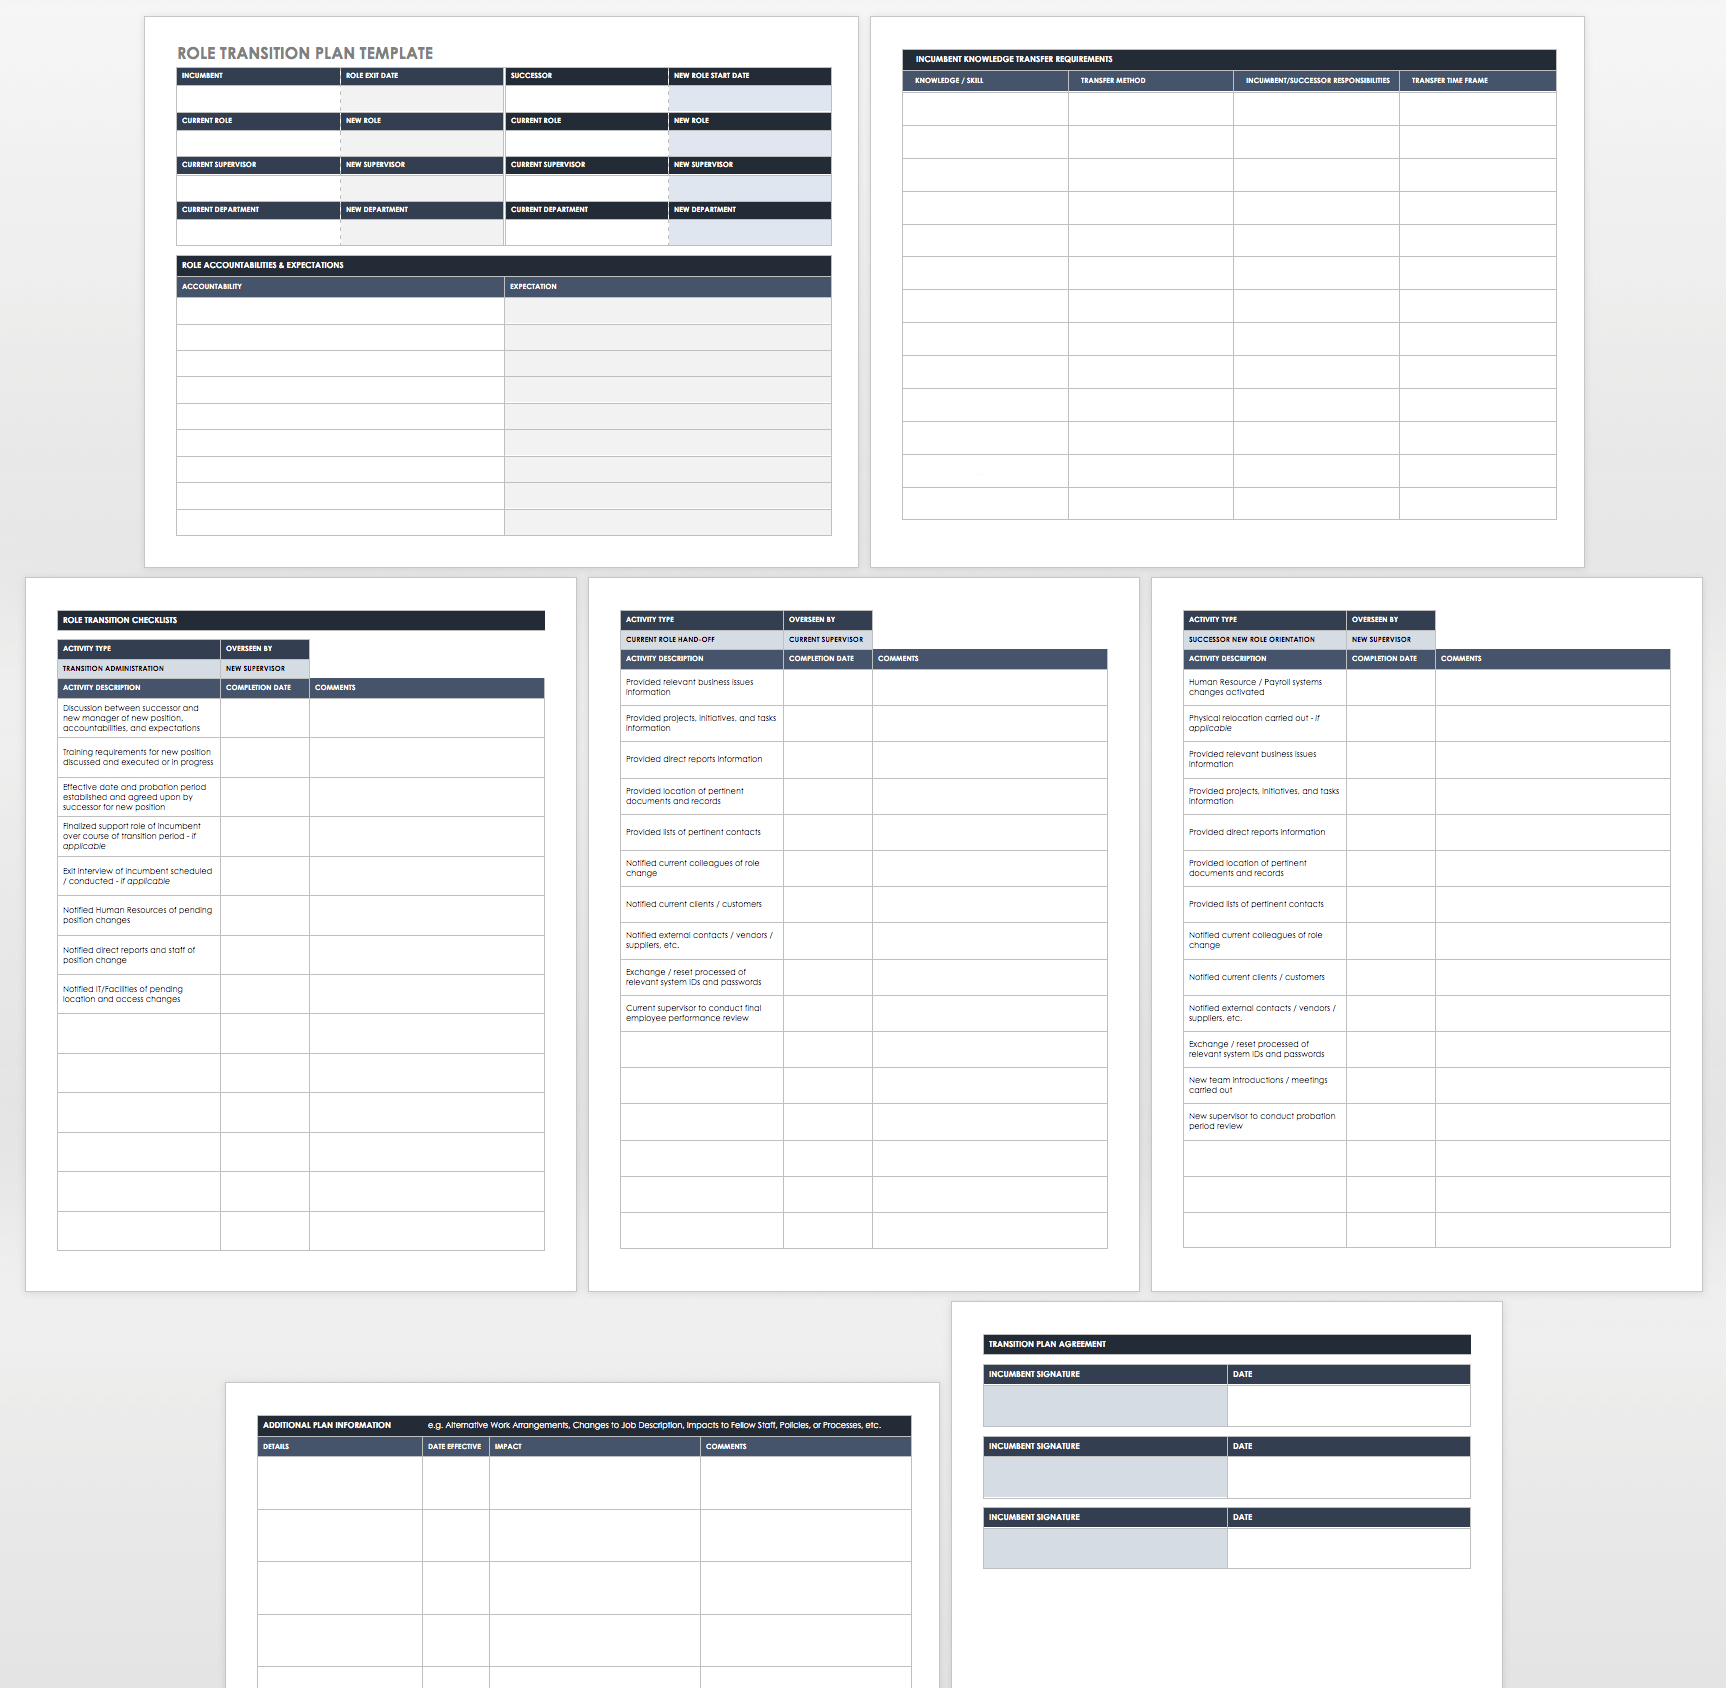 Free Business Transition Plan Templates  Smartsheet intended for Business Process Transition Plan Template